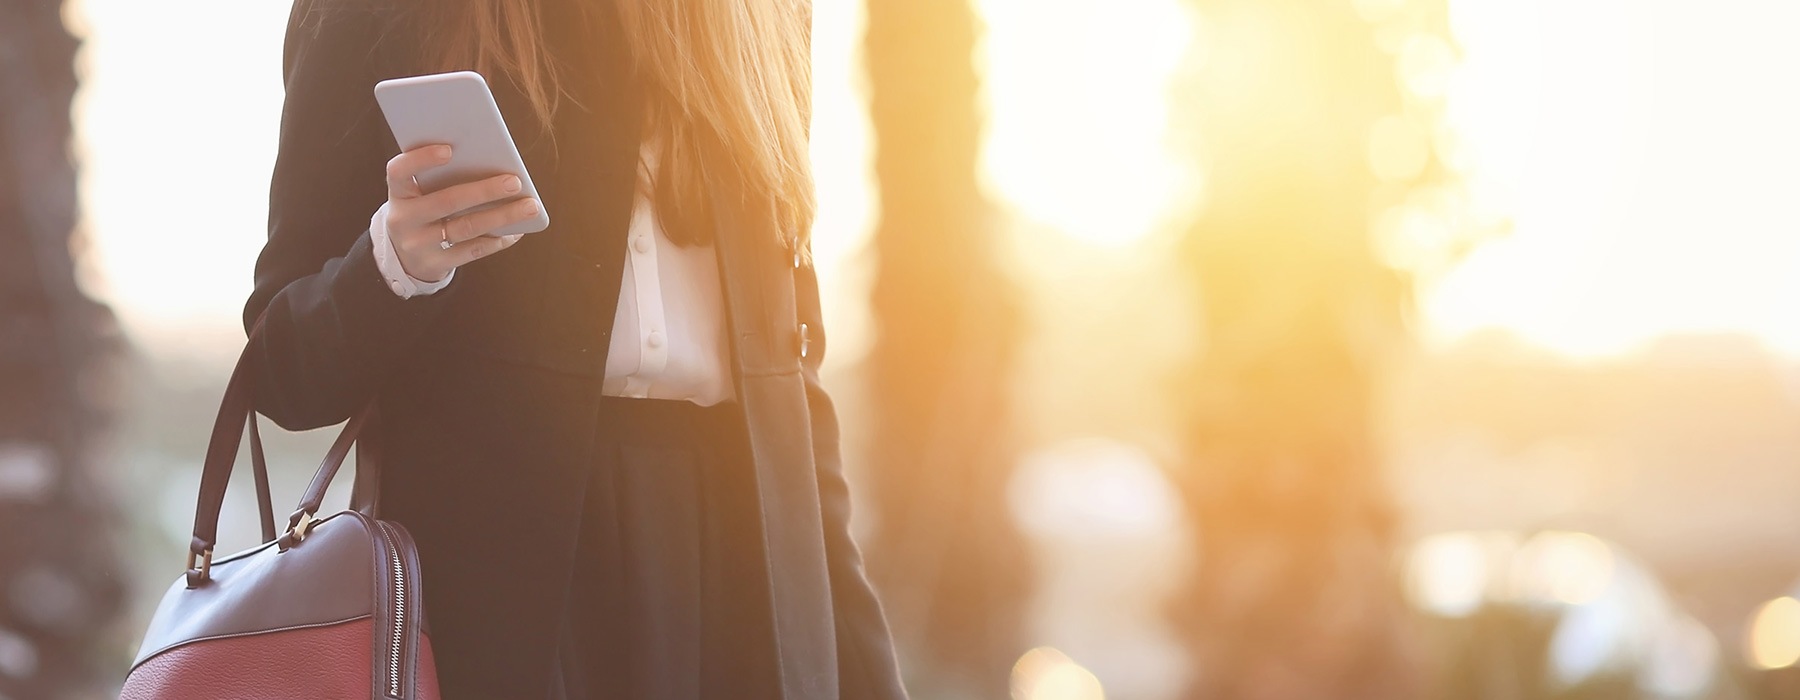 lifestyle image of a woman walking outside at sunset with her phone and purse